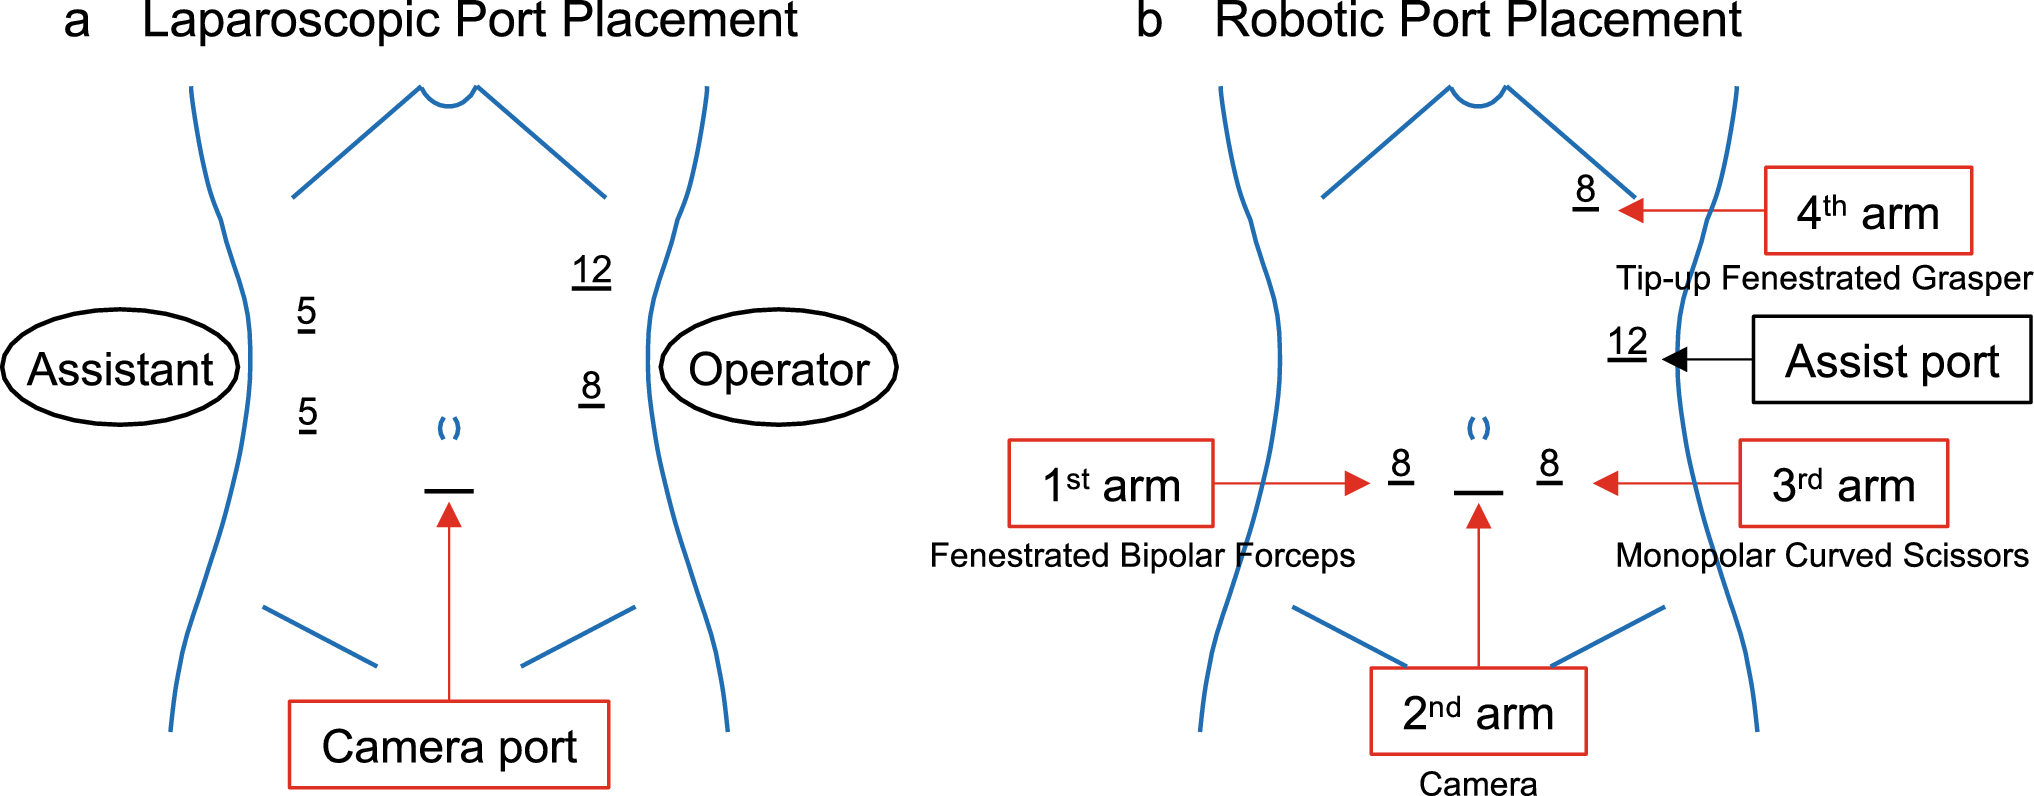 Utility of articulating instruments as an alternative to robotic devices in laparoscopic right hemicolectomy